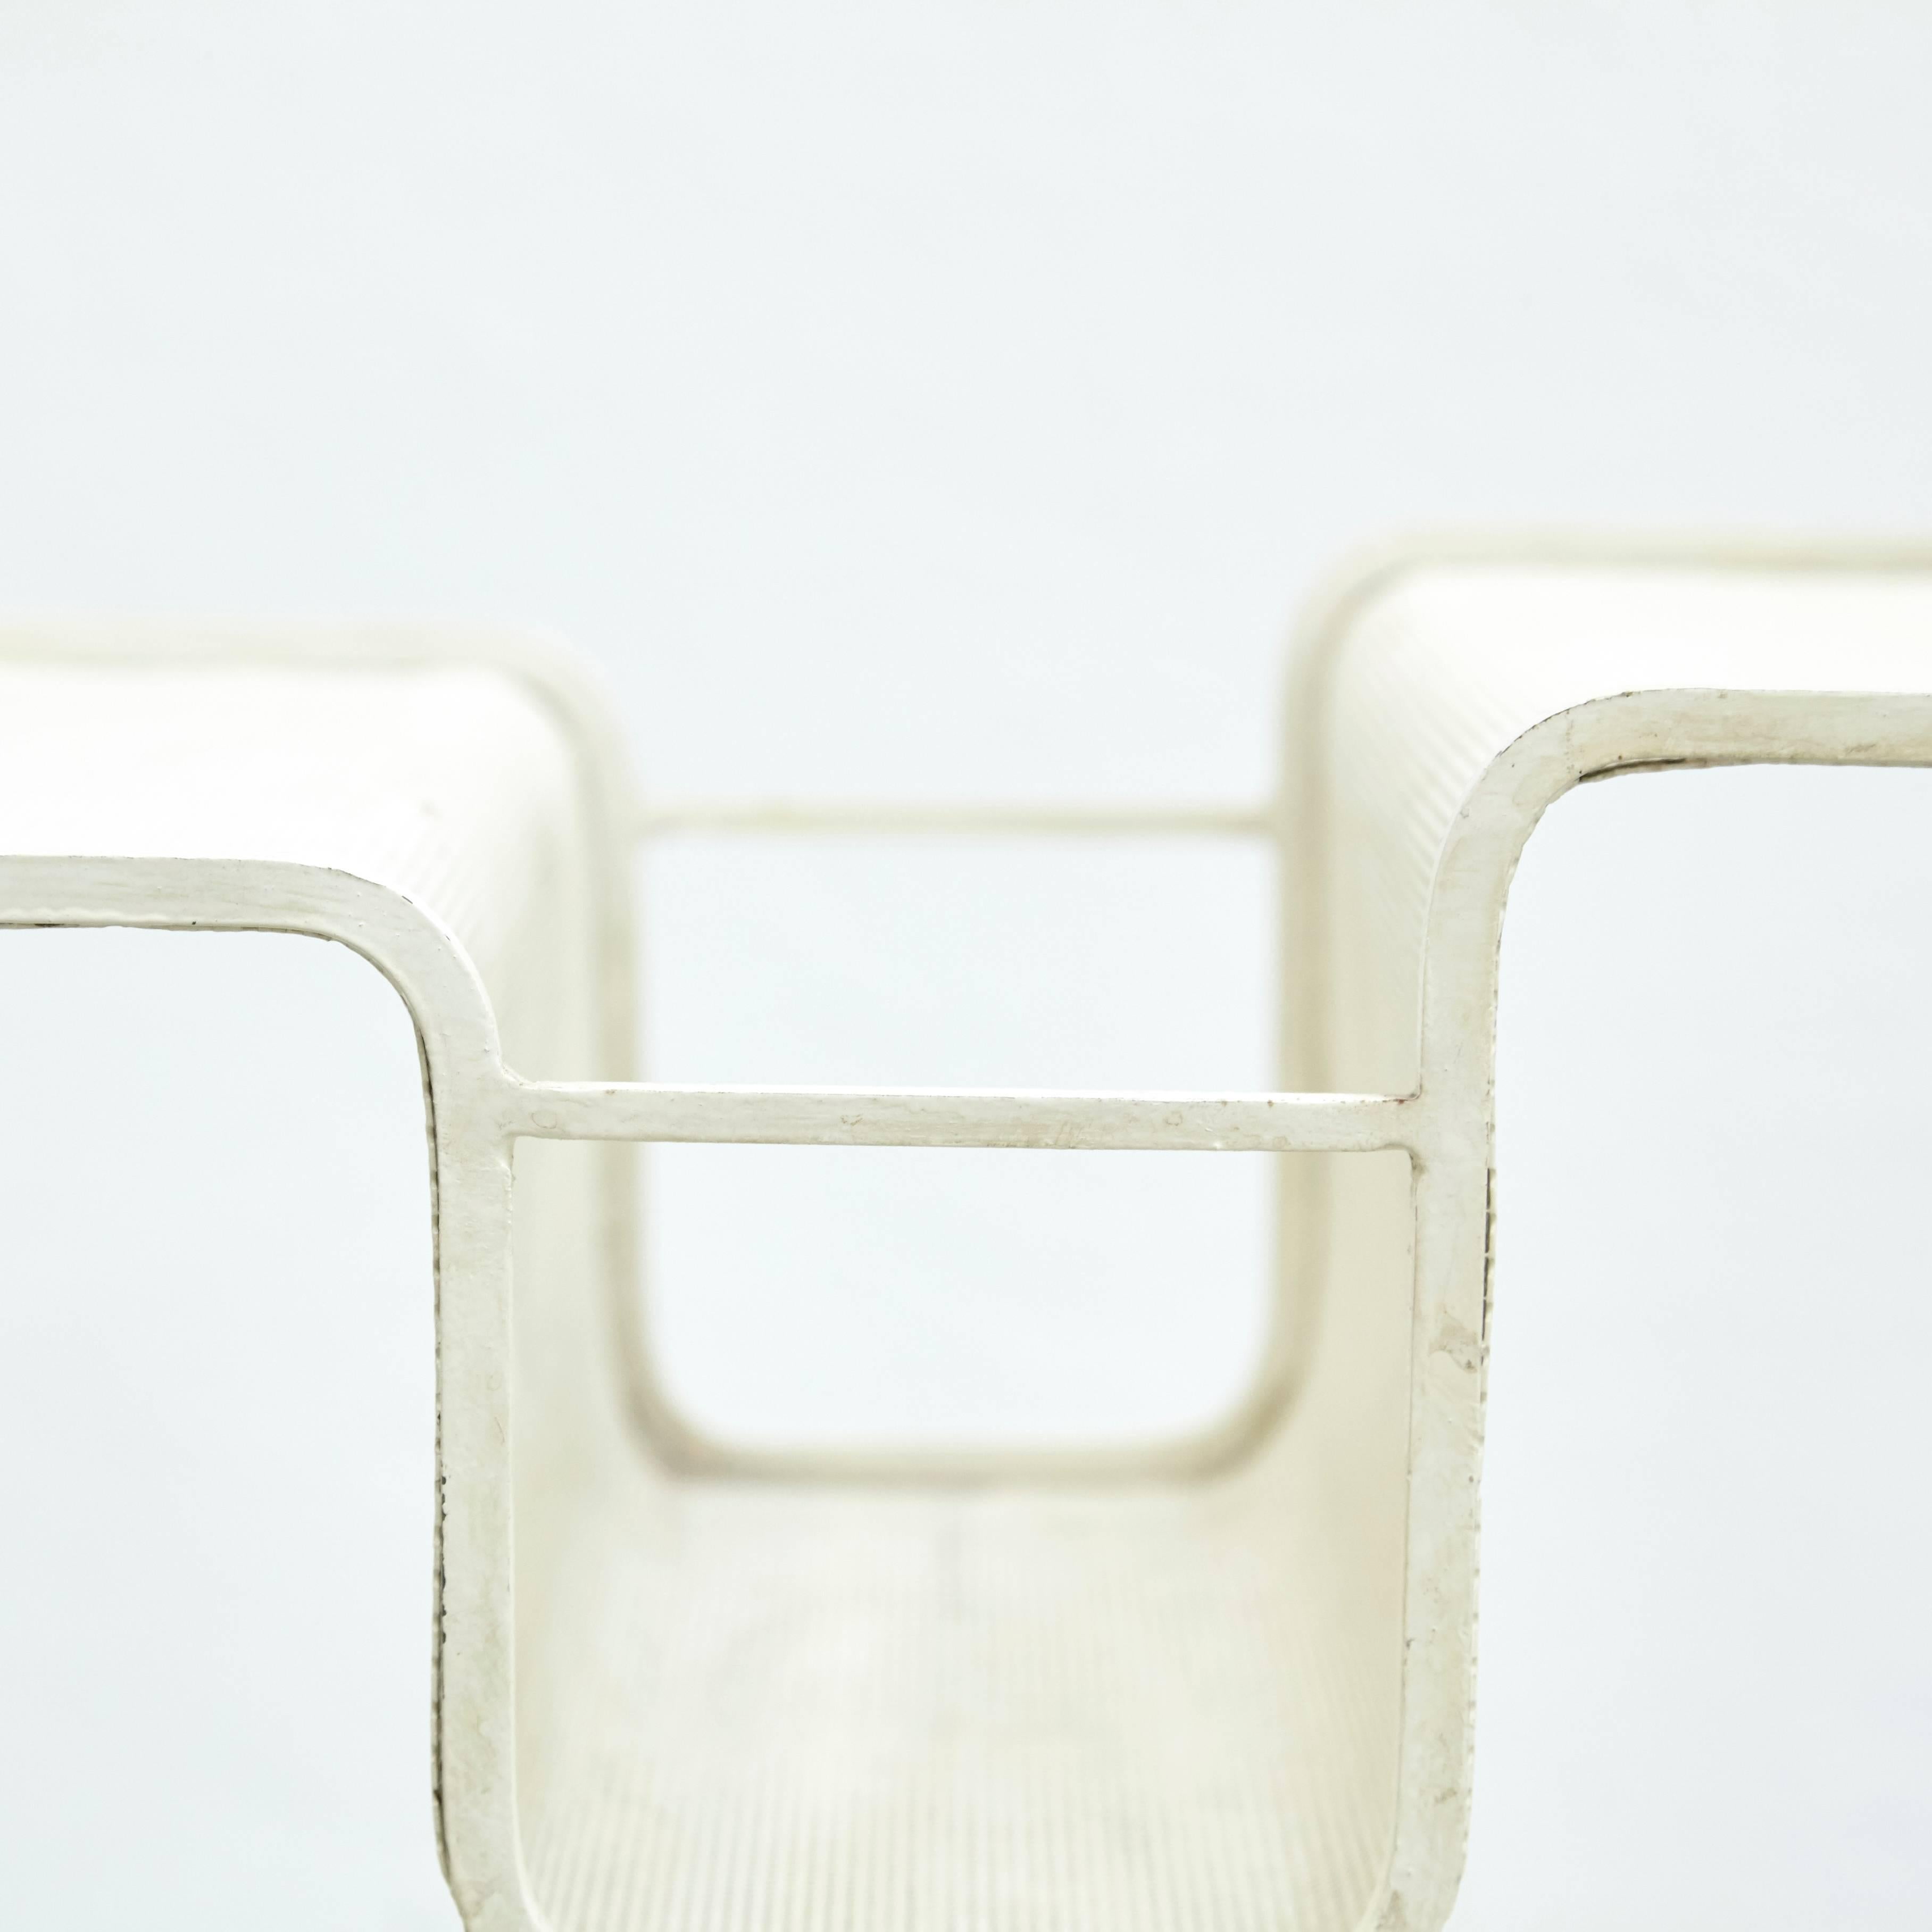 Metal Mathieu Mategot Mid Century Modern White Lacquered French Trolley, circa 1950